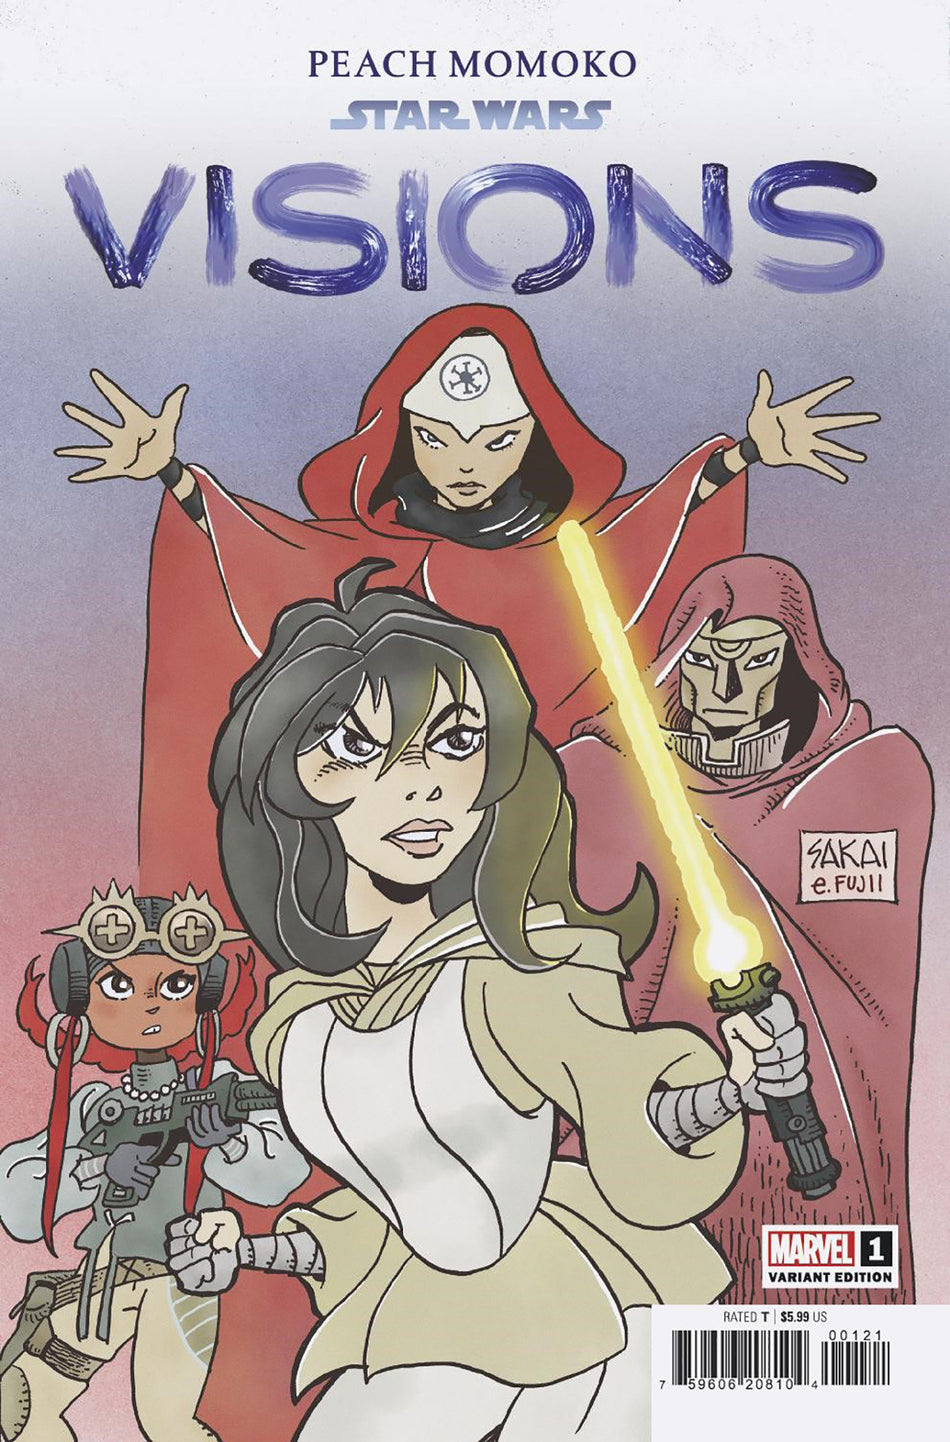 Stock photo of Star Wars: Visions - Peach Momoko 1 Stan Sakai Variant Comics sold by Stronghold Collectibles